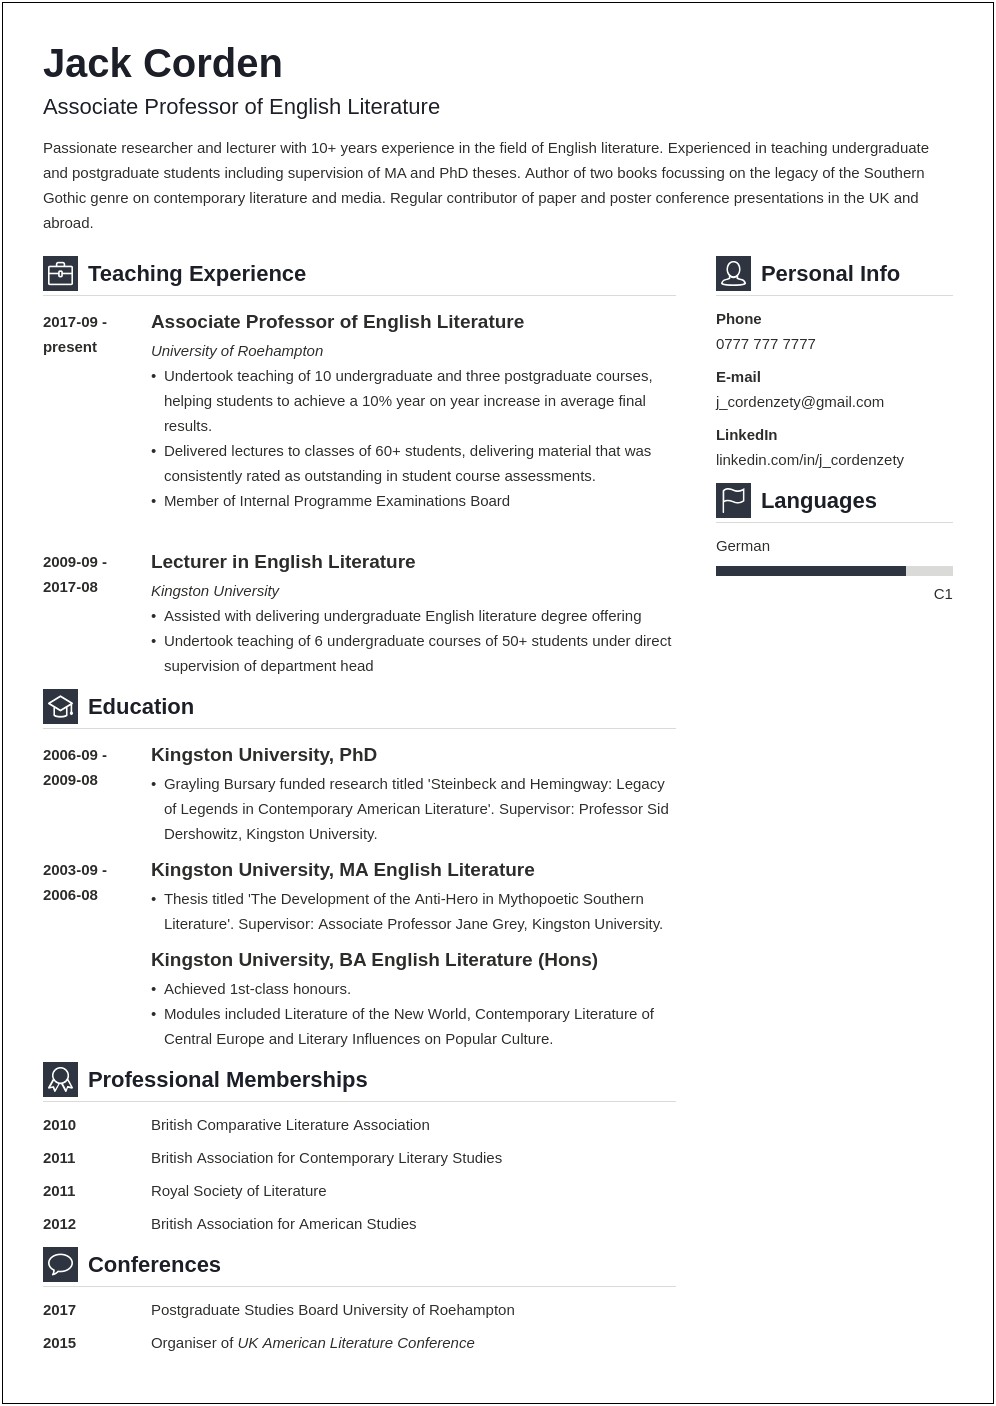 Resume Samples For Higher Education Positions